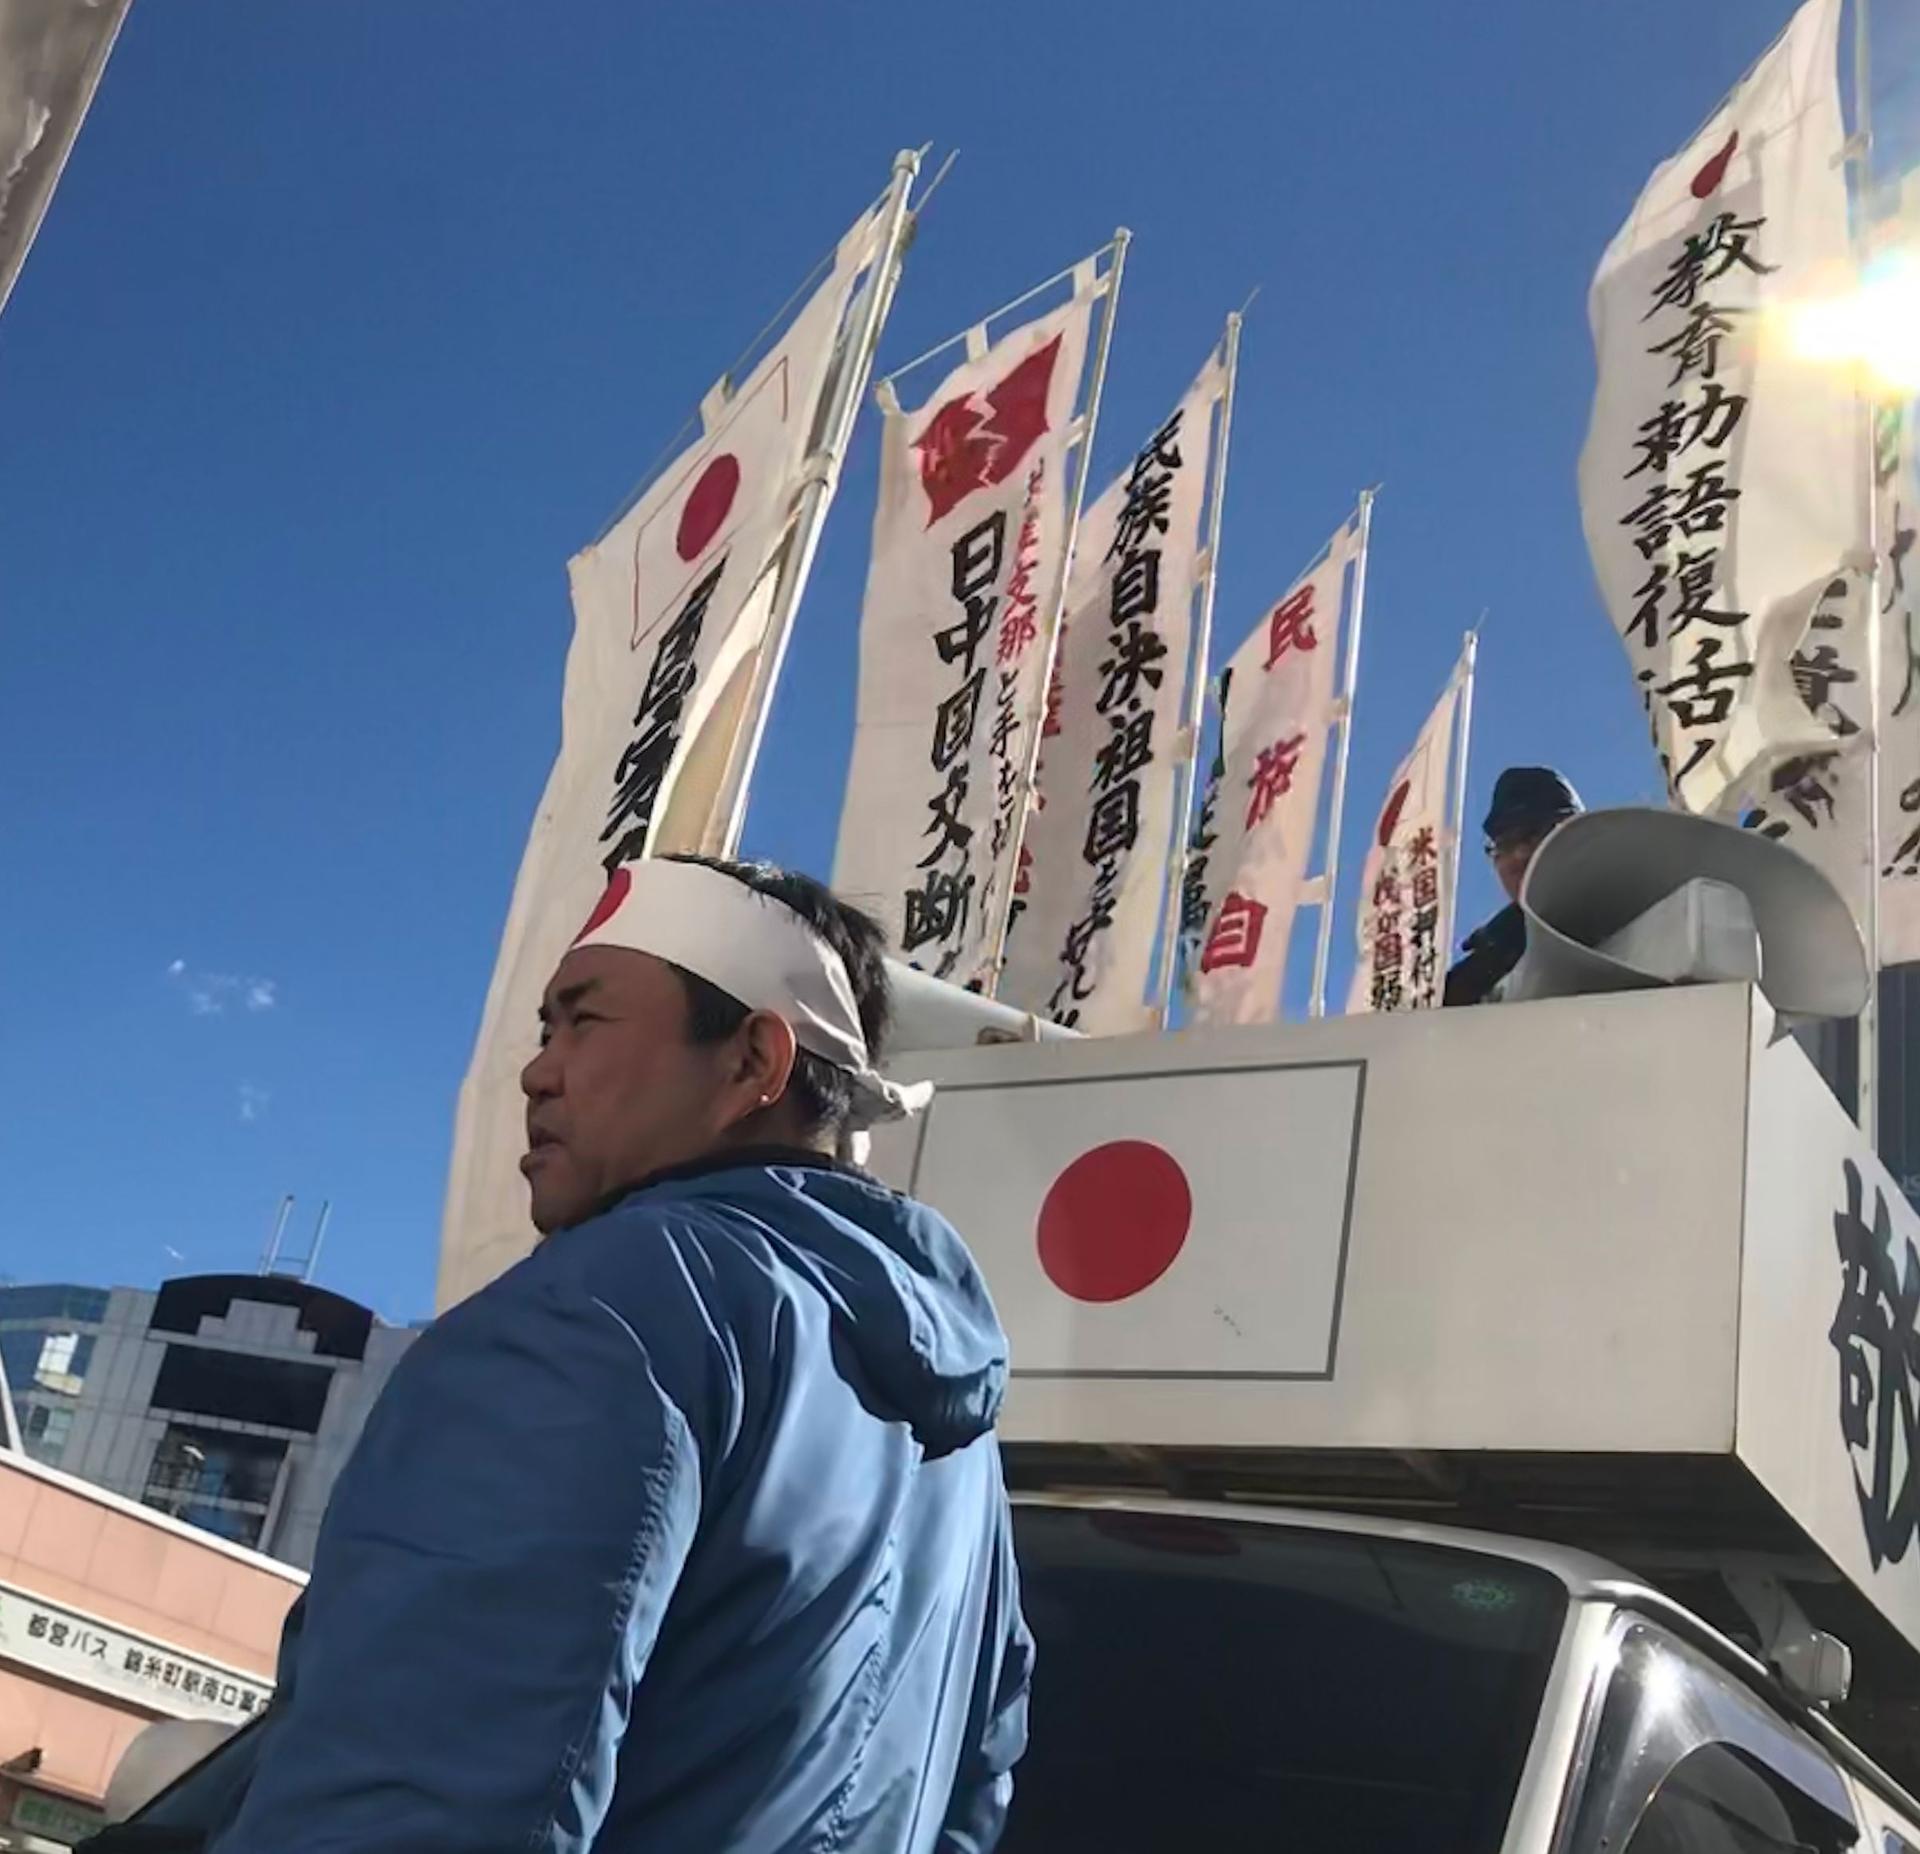 A man wears a bandana with the red circle from Japan's flag on his forehead. Behind him is a white van with Japanese banners and flags.